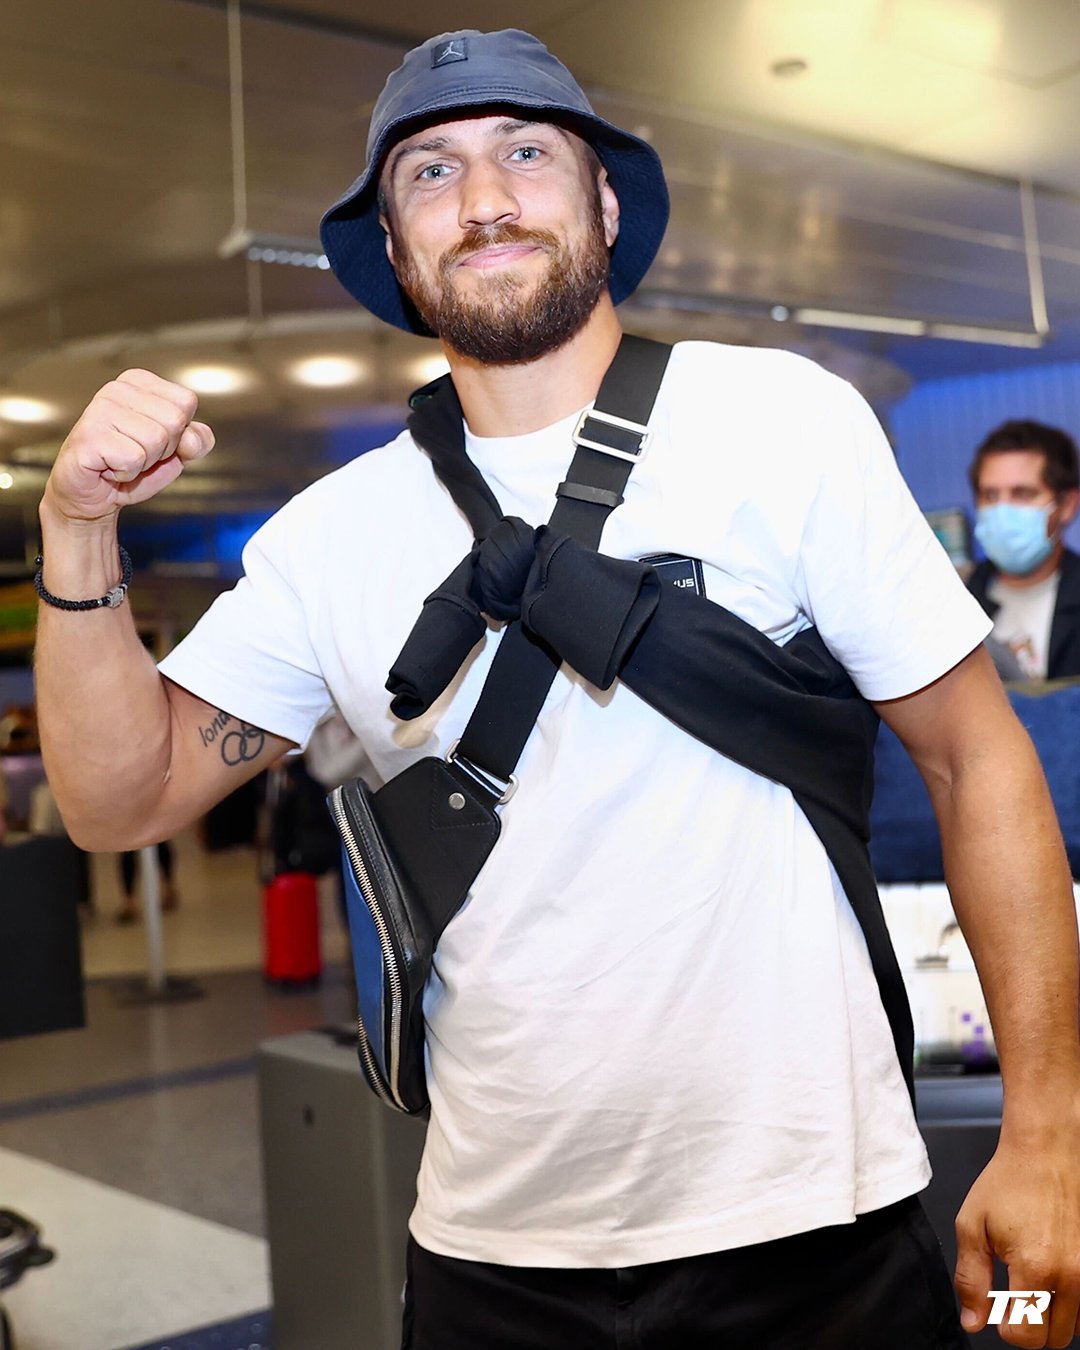 Vasiliy Lomachenko has arrived in the U.S. as he plans his boxing return